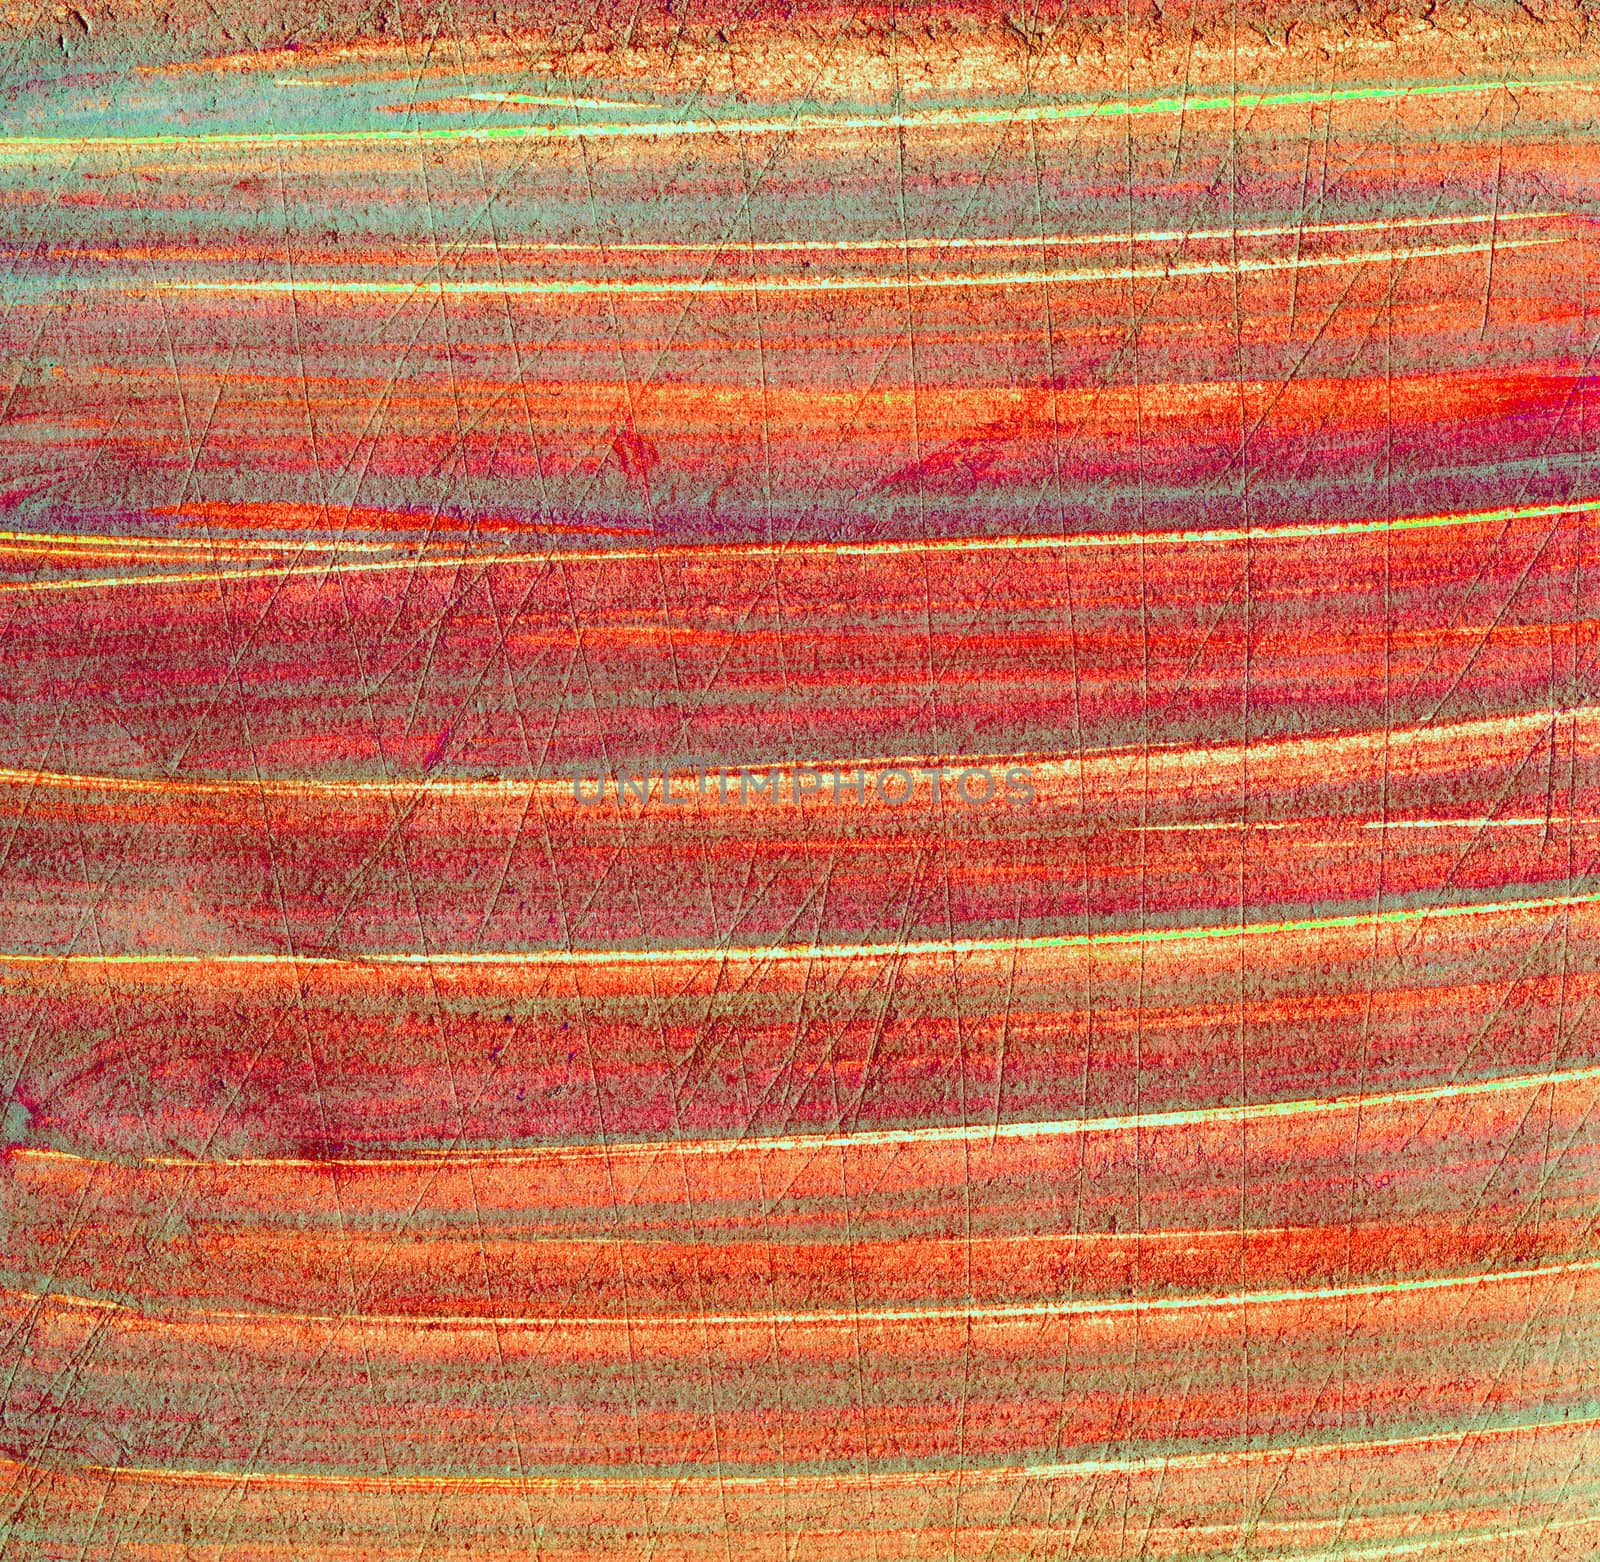 Scratched grunge surface of red old paper texture